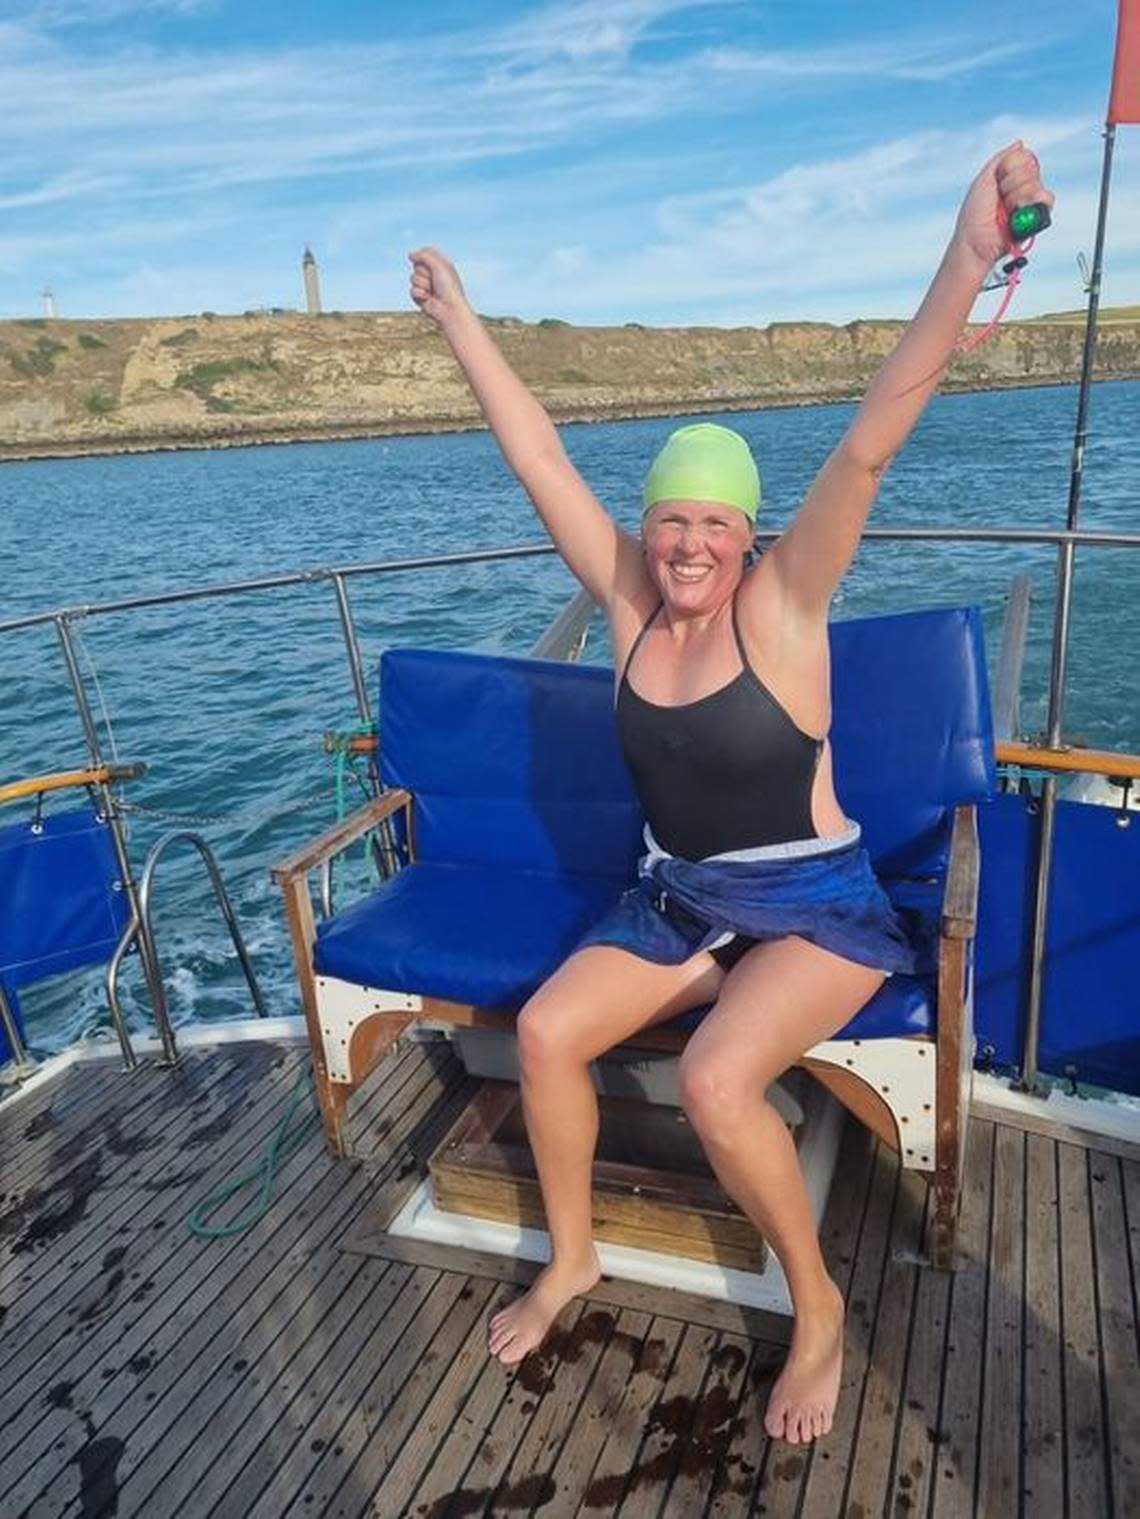 Laura Goodwin, 44, of Cary, swam the English Channel on Monday, July 11, notching a lifelong goal